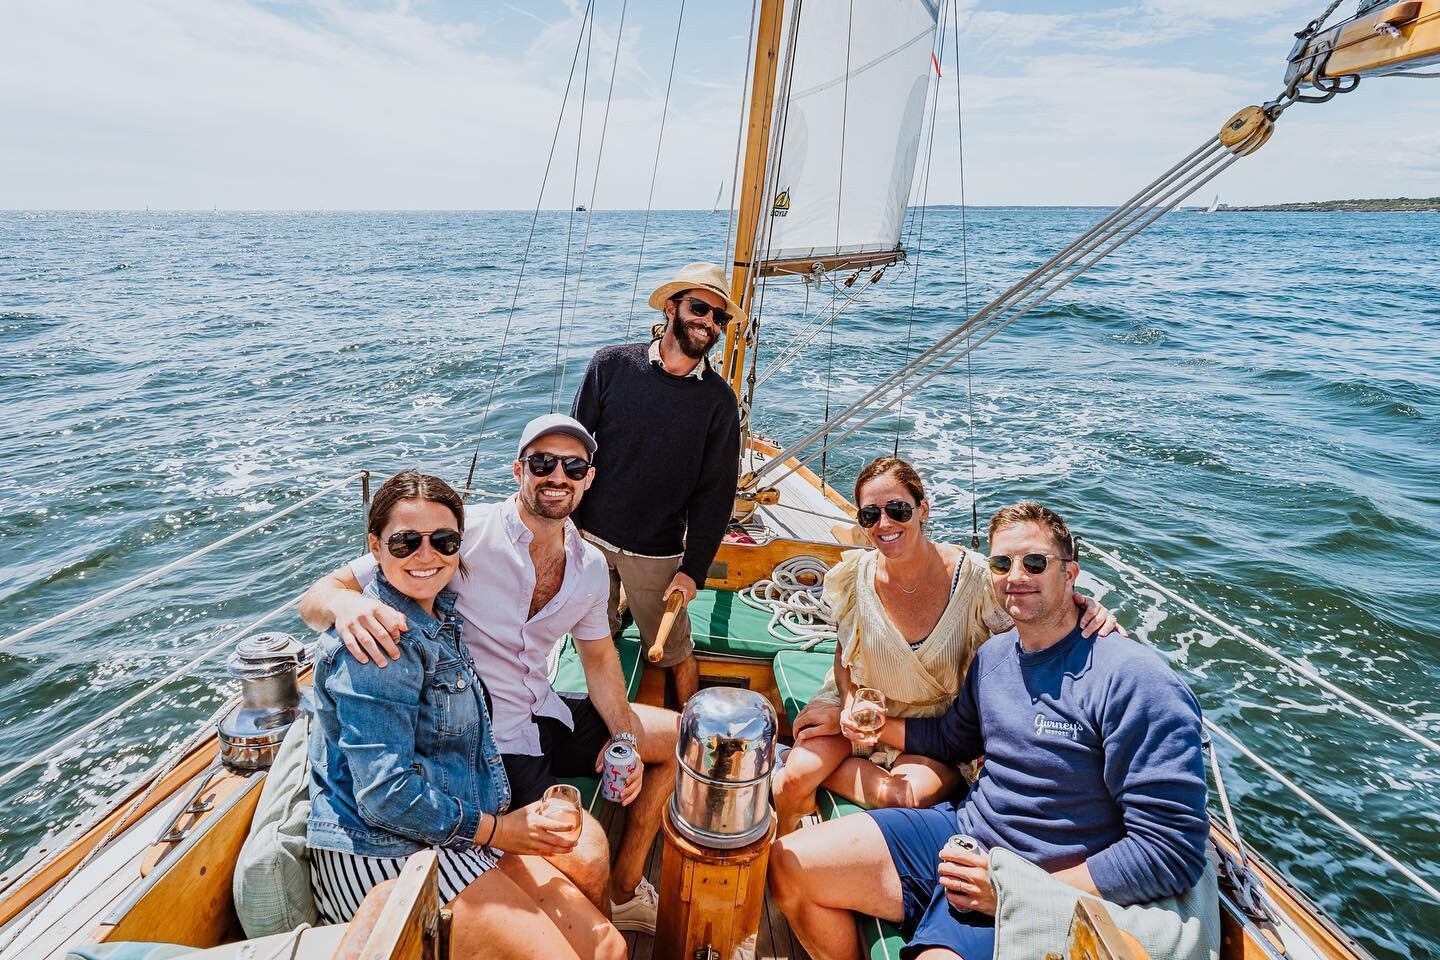 Today would have been a blustery kickoff to our 2020 summer season.  Some of our favorite guests were meant to return for the weekend and sail with us.  We are so grateful for all of the wonderful folks who share time with us on the water.  Ensuring 